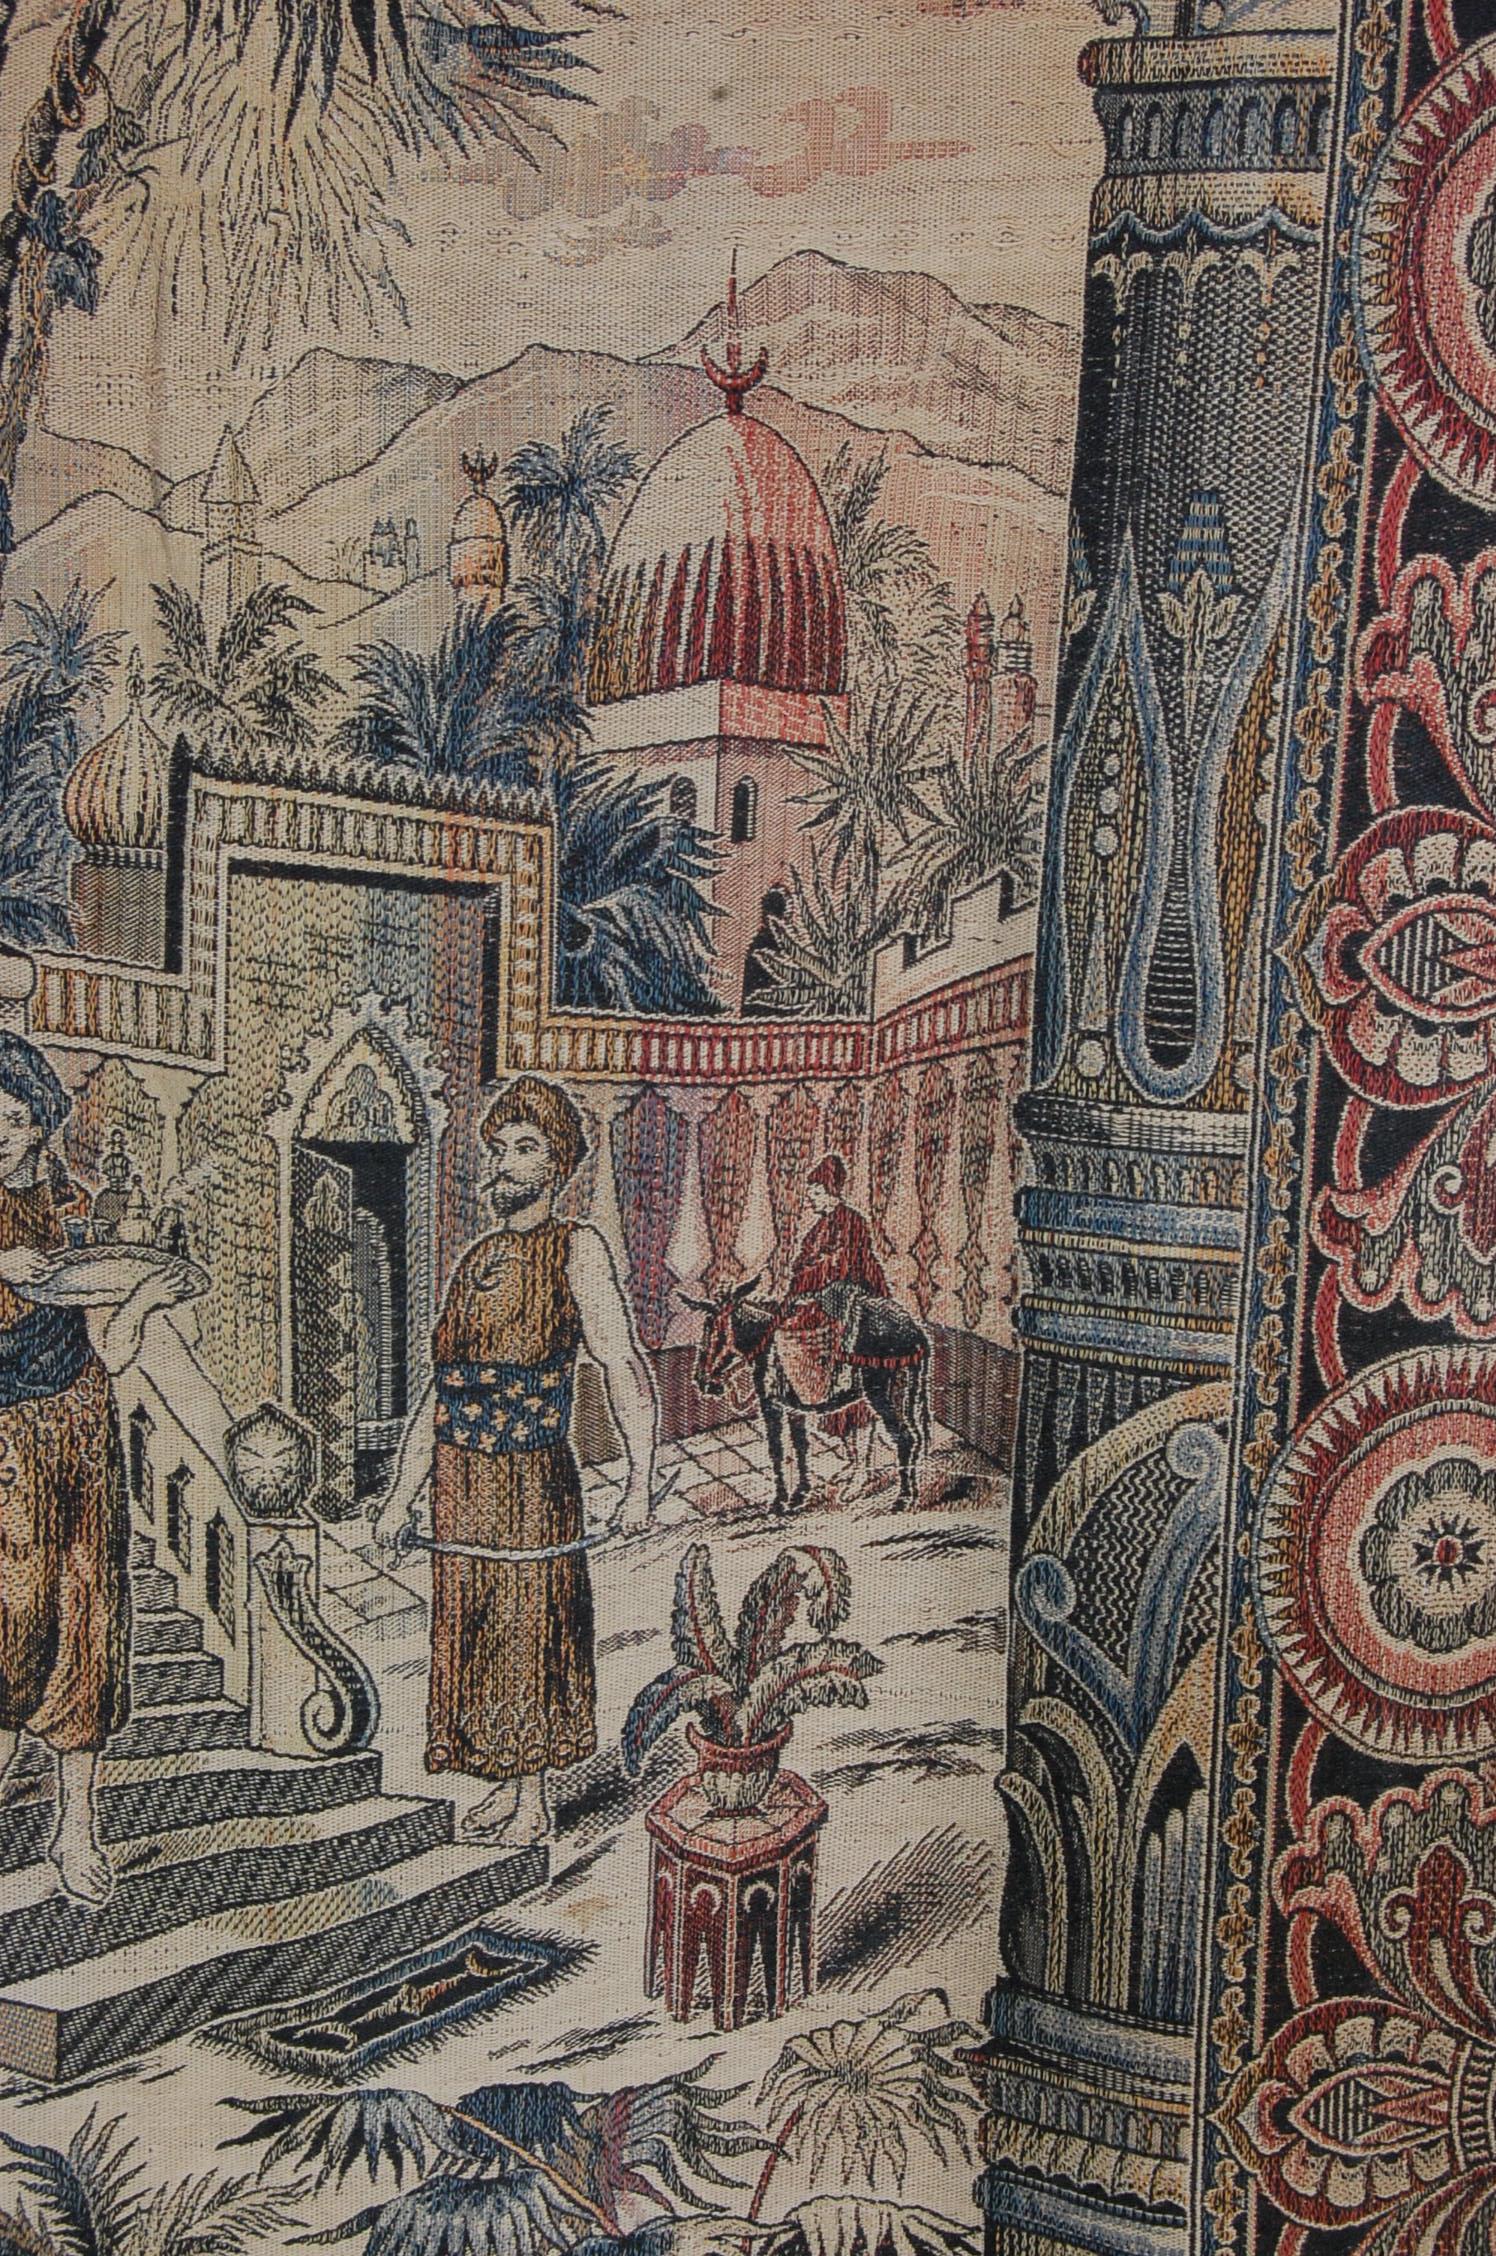 LARGE ARABIC / ISLAMIC WALL TAPESTRY - Image 5 of 7